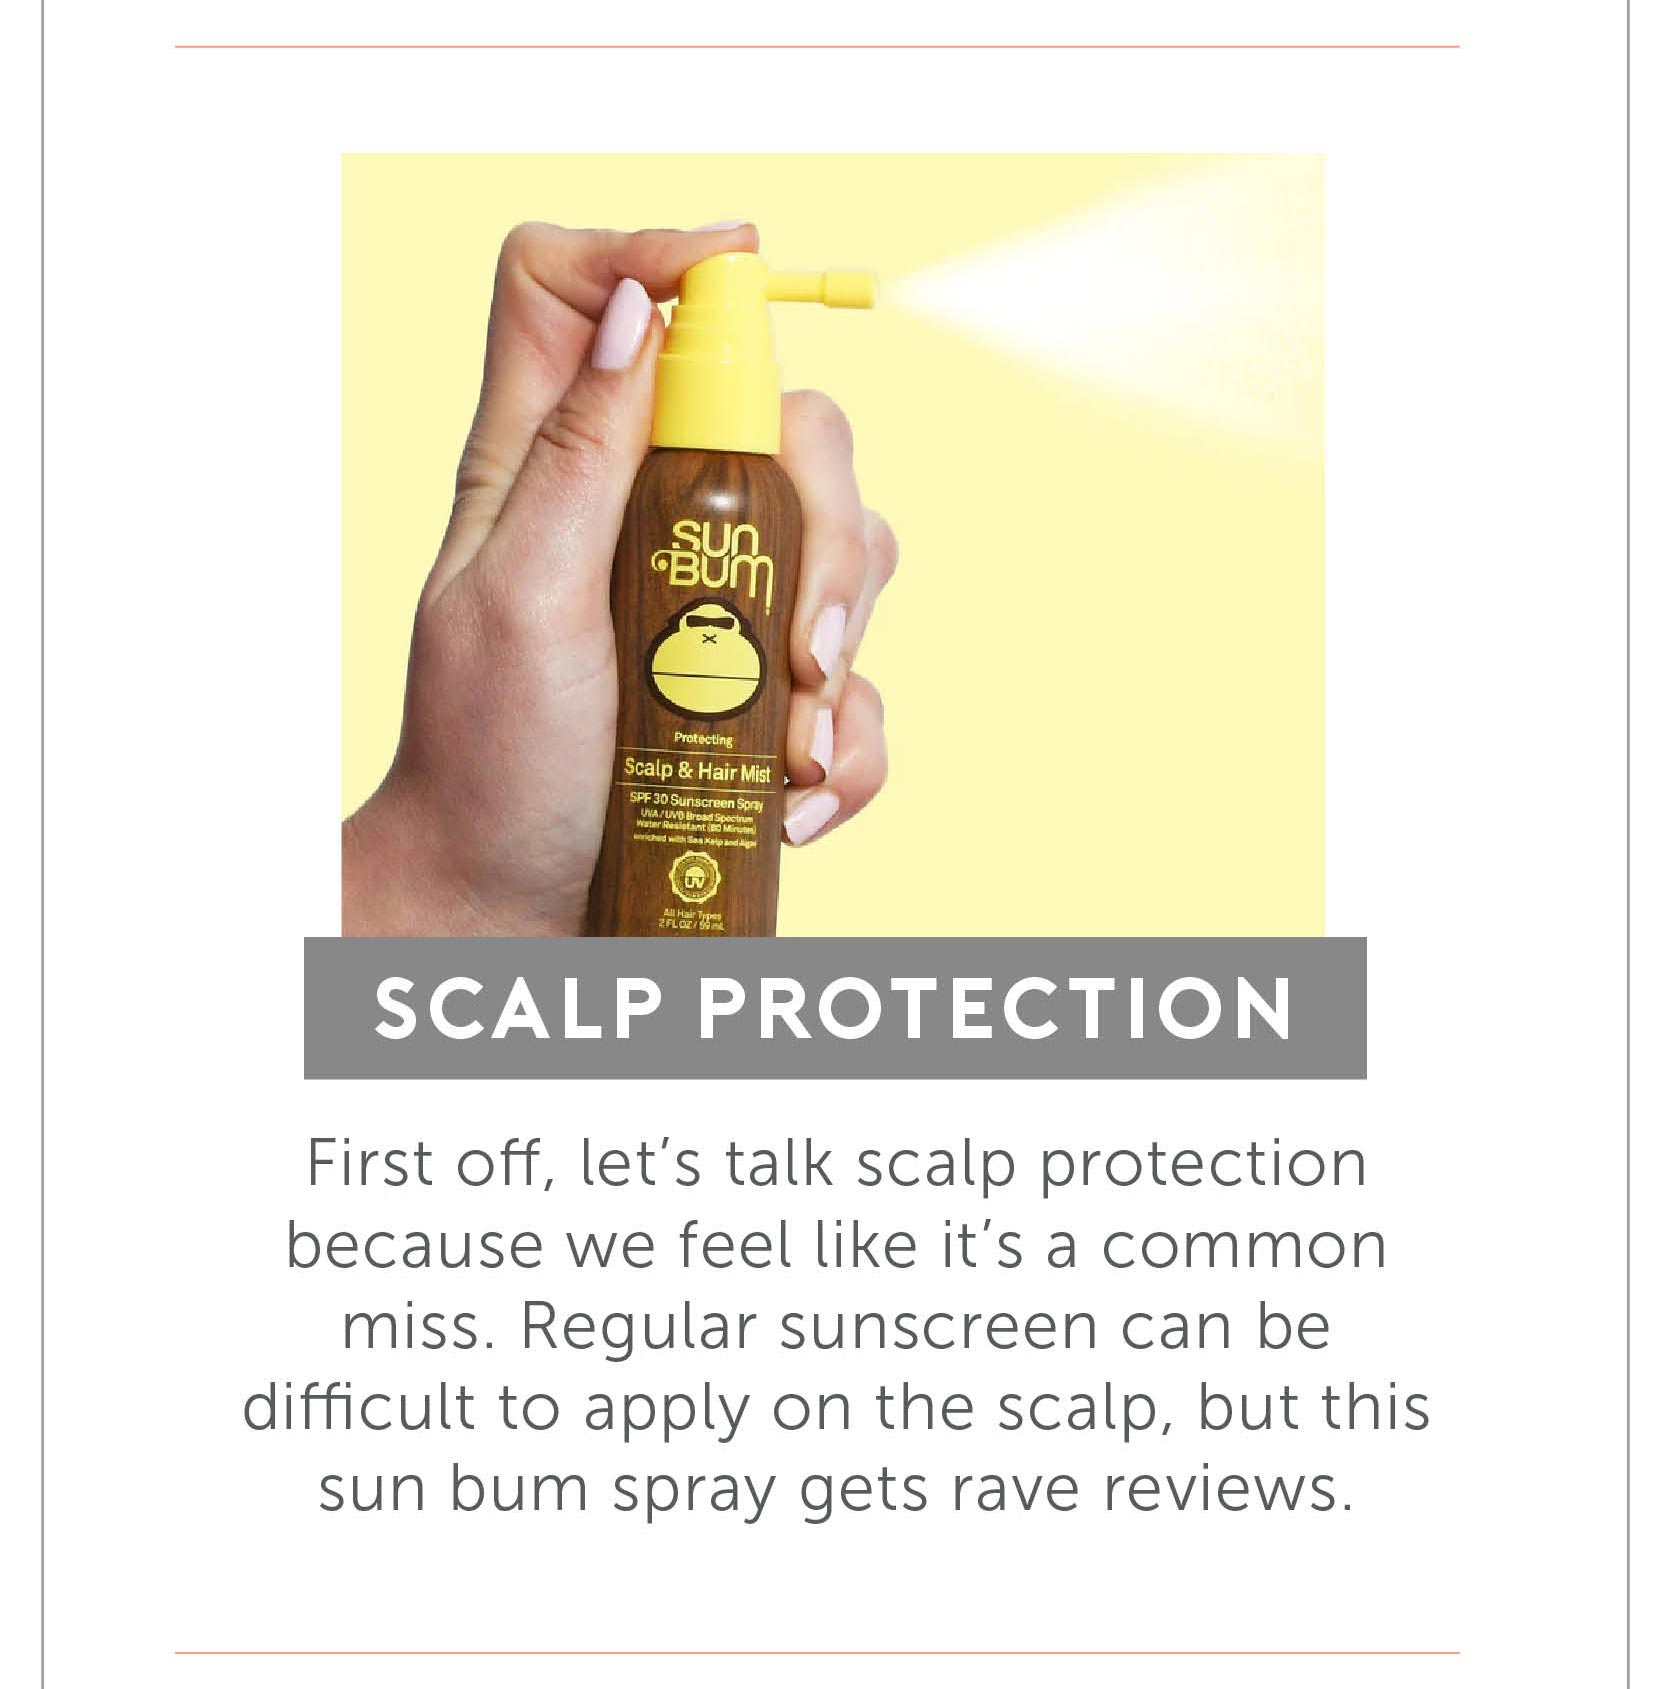 Scalp Protection - First off, let’s talk scalp protection because we feel like it’s a common miss. Regular sunscreen can be difficult to apply on the scalp, but this sun bum spray gets rave reviews.